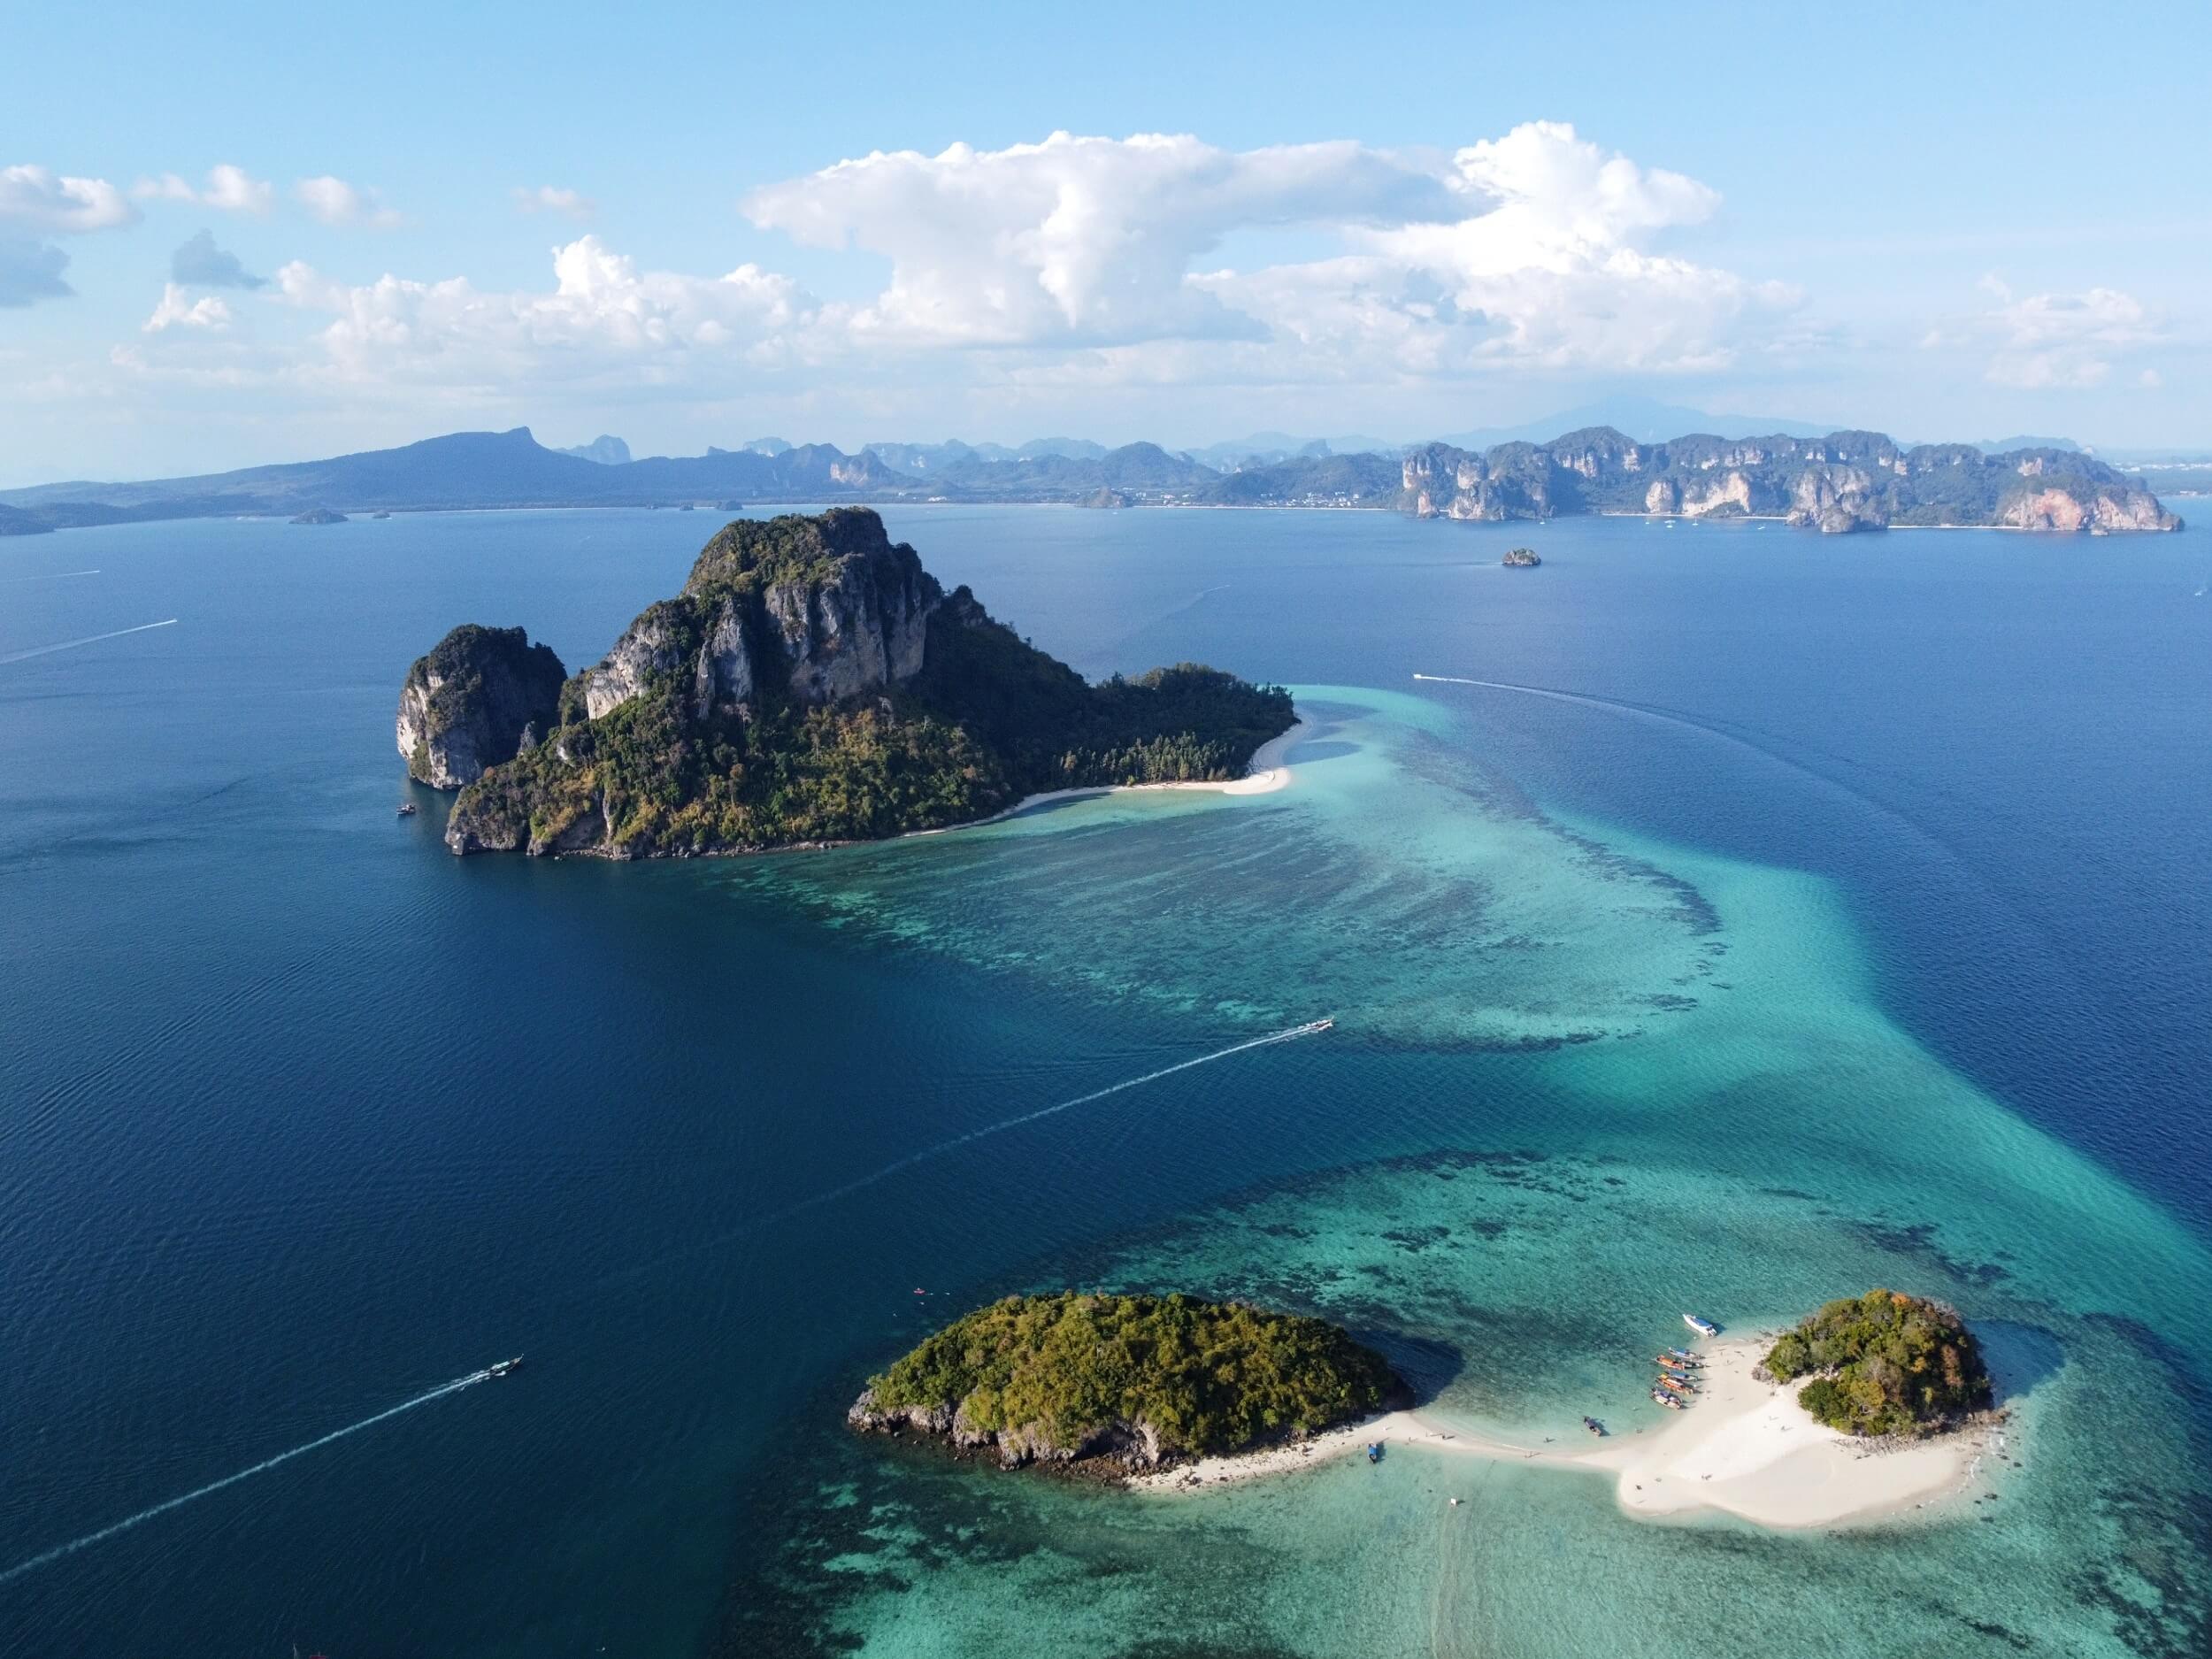 Krabi drone photography - blue waters with two islands with sandy beach in the foreground